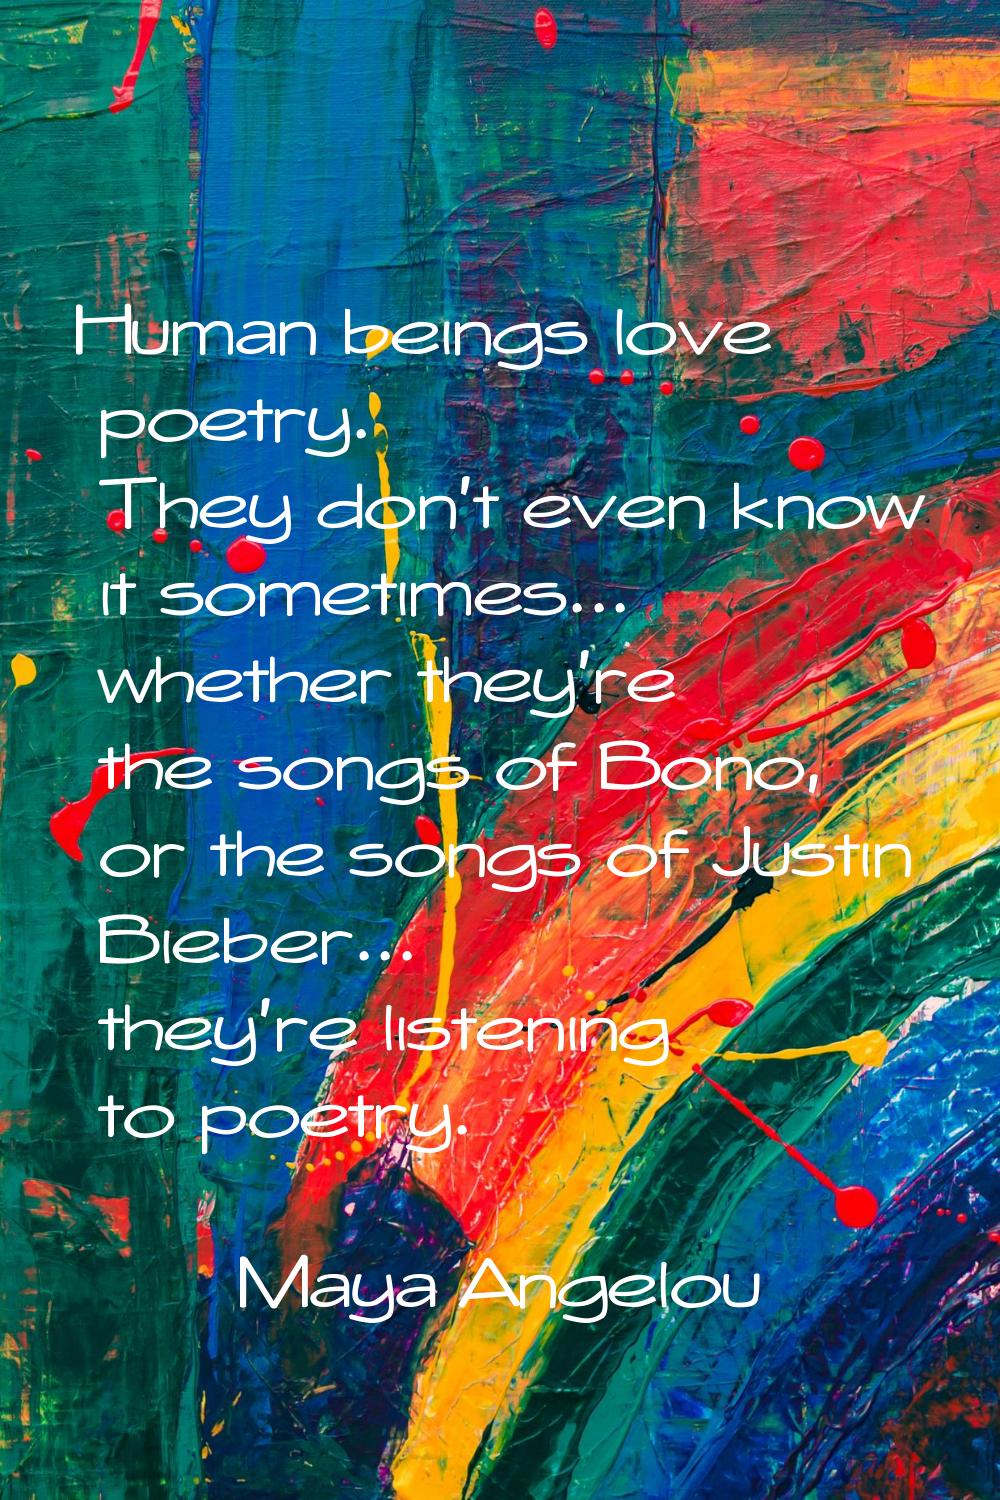 Human beings love poetry. They don't even know it sometimes... whether they're the songs of Bono, o